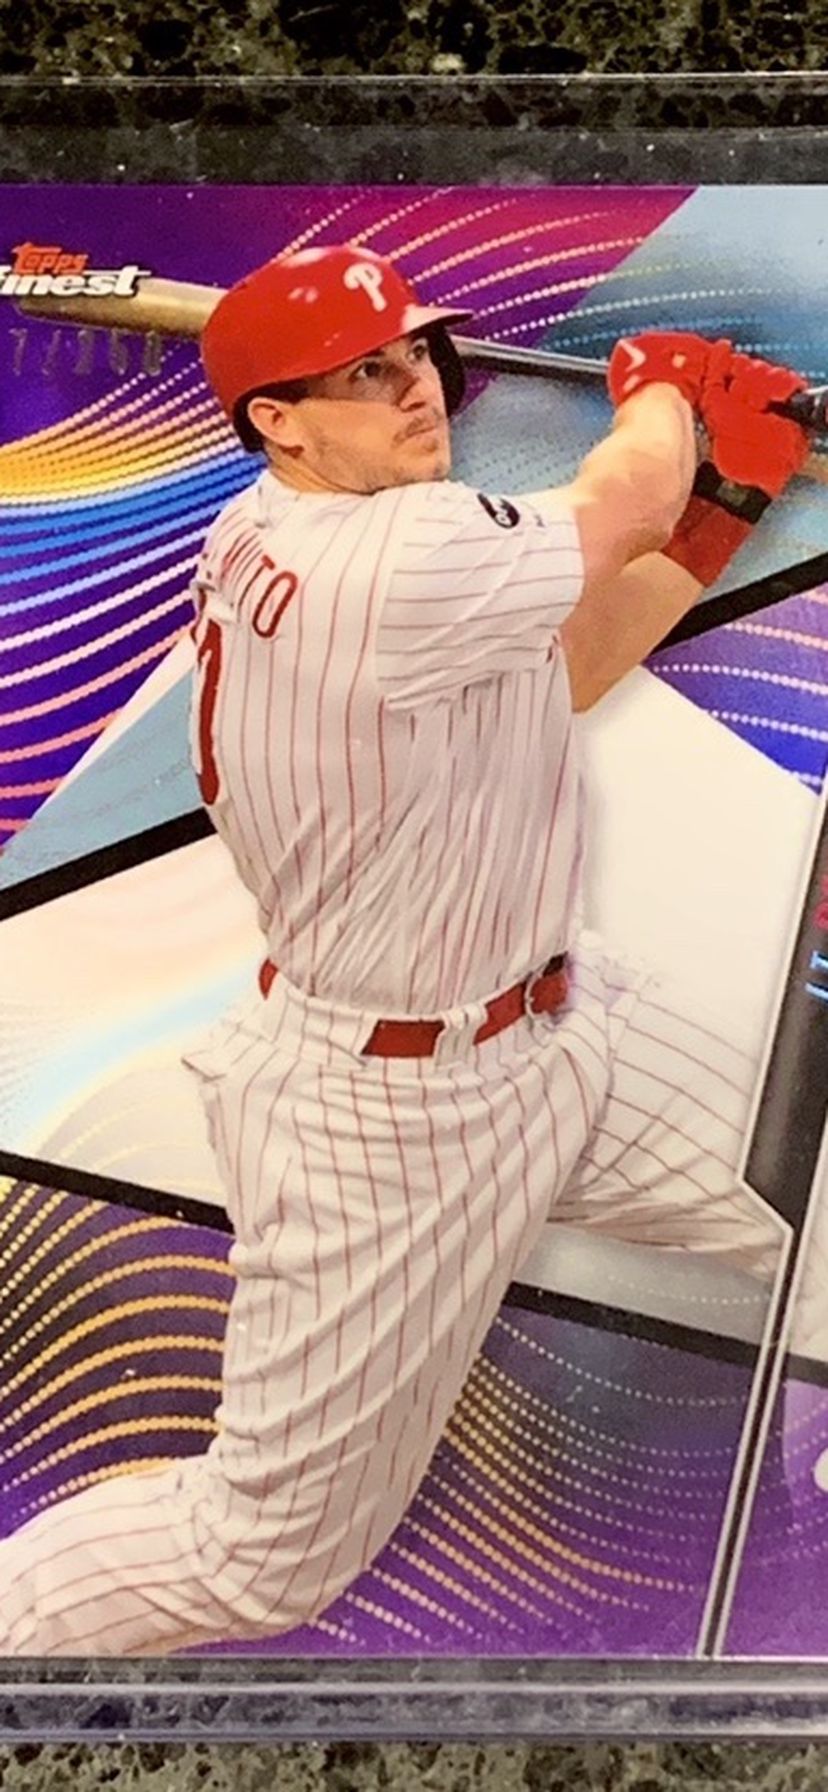 2020 Topps Finest JT Realmuto Phillies Purple Parallel Baseball Card. Numbered To 250.